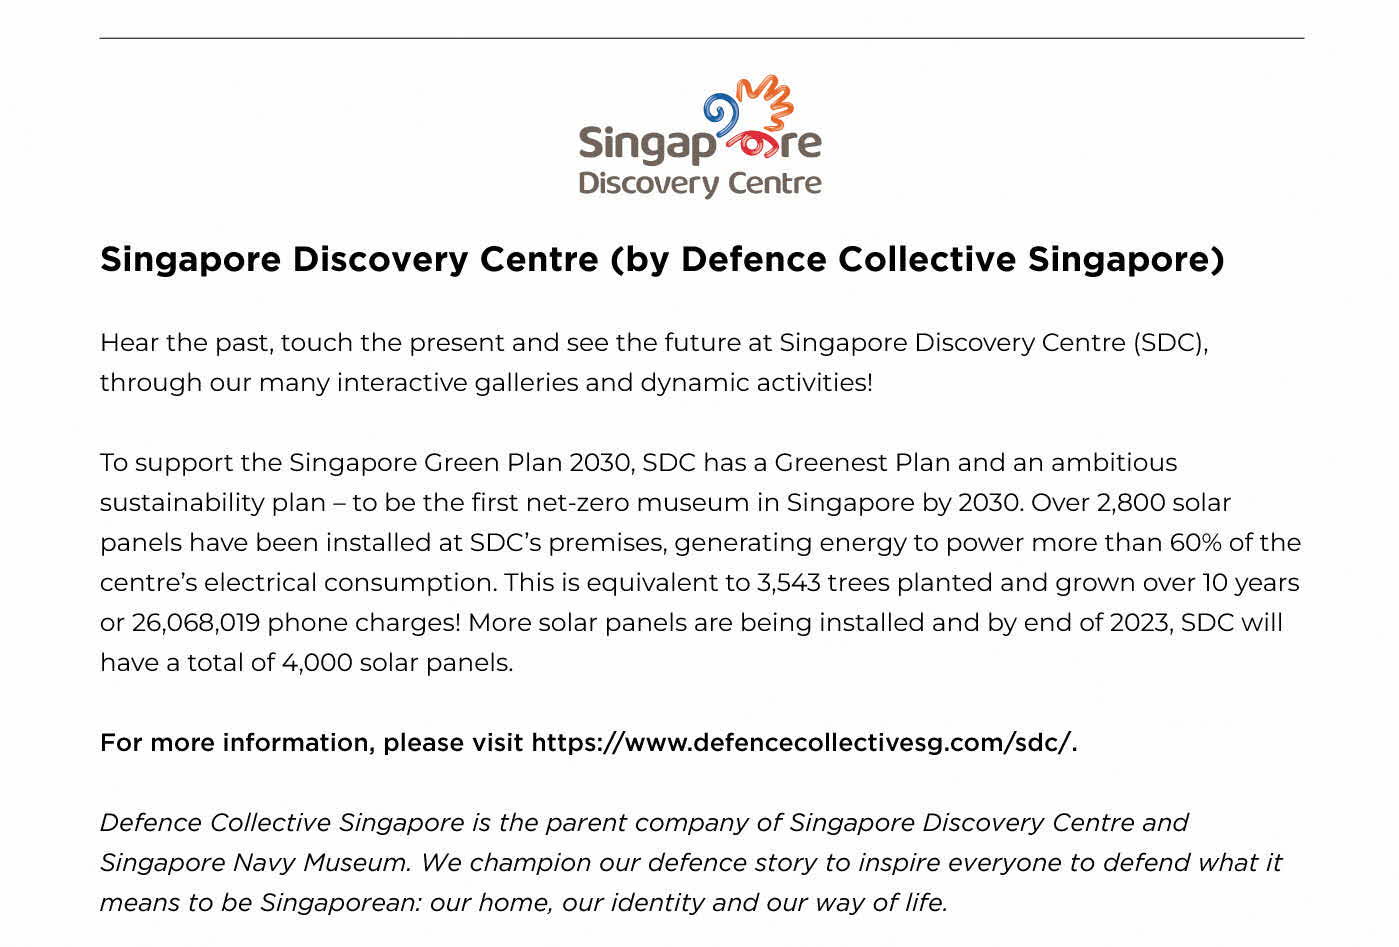 Singapore Discovery Centre (by Defence Collective Singapore)